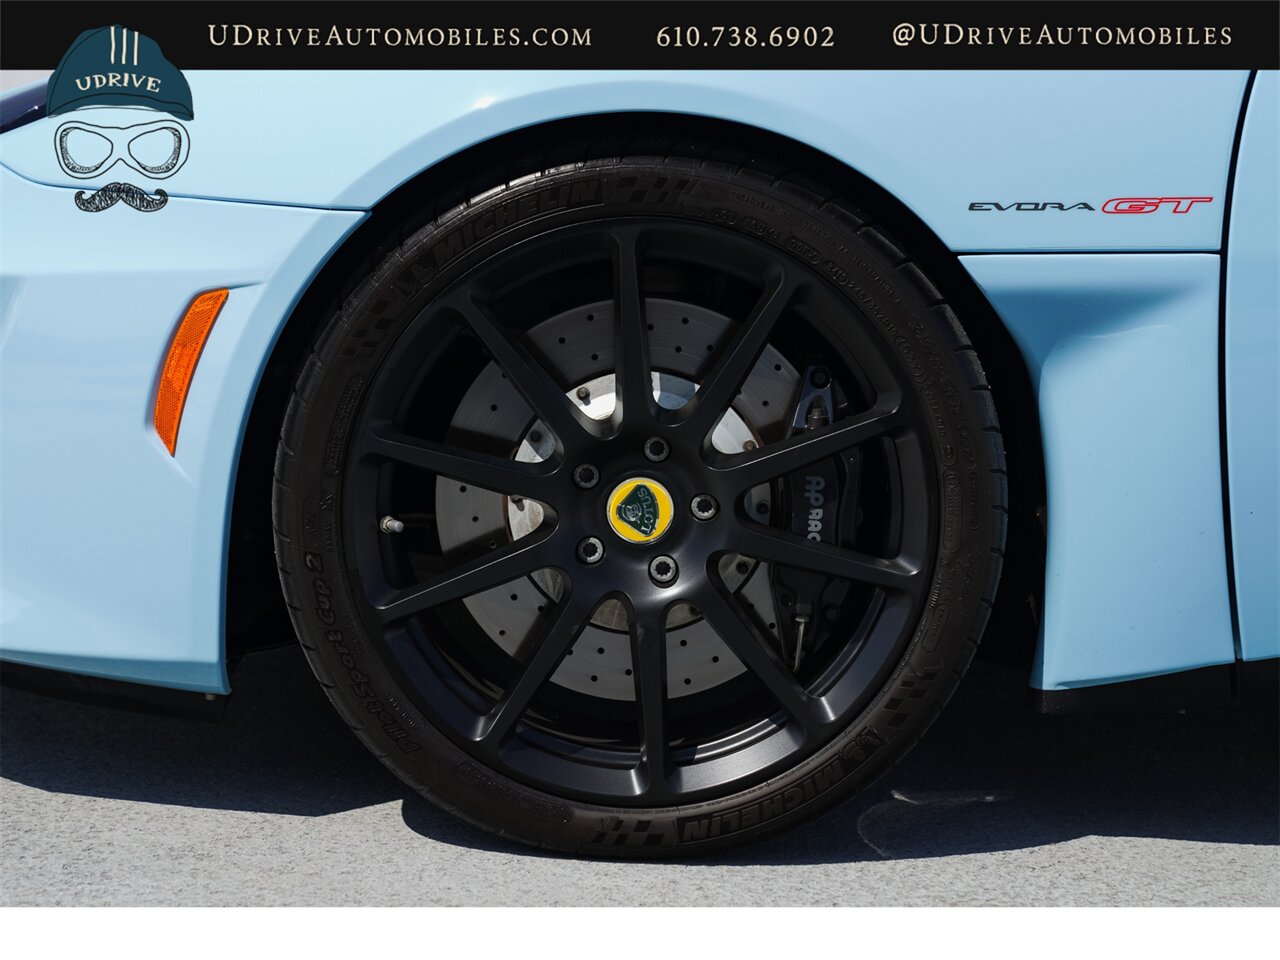 2020 Lotus Evora GT 2+2  6 Speed Manual Sky Blue Bespoke Stitching - Photo 54 - West Chester, PA 19382